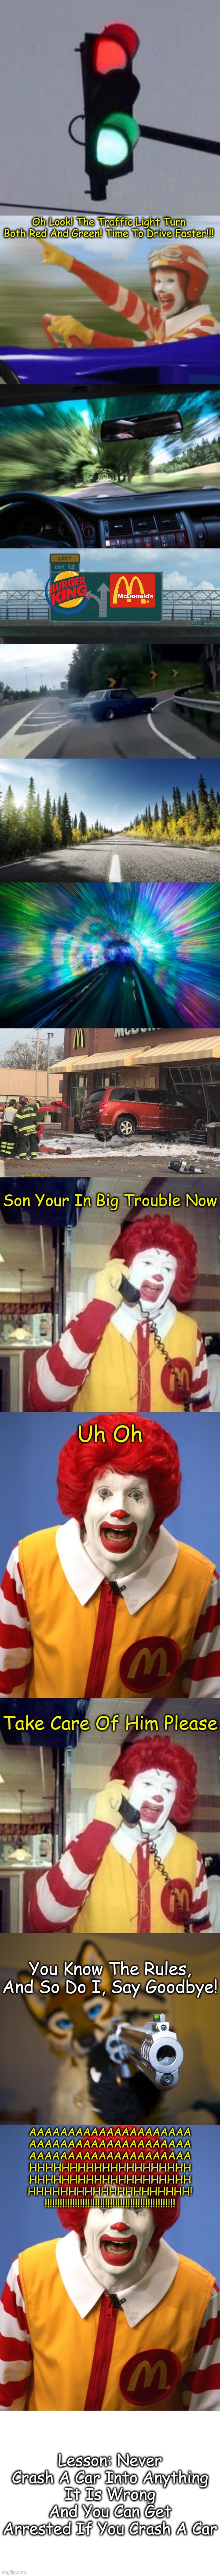 Ronald McDonald Is In Big Trouble Now | Oh Look! The Traffic Light Turn Both Red And Green! Time To Drive Faster!!! Son Your In Big Trouble Now; Uh Oh; Take Care Of Him Please; You Know The Rules, And So Do I, Say Goodbye! AAAAAAAAAAAAAAAAAAAAA
AAAAAAAAAAAAAAAAAAAAA
AAAAAAAAAAAAAAAAAAAAA
HHHHHHHHHHHHHHHHHHHH
HHHHHHHHHHHHHHHHHHHH
HHHHHHHHHHHHHHHHHHHH!
!!!!!!!!!!!!!!!!!!!!!!!!!!!!!!!!!!!!!!!!!!!!!!!!!!!! Lesson: Never Crash A Car Into Anything
It Is Wrong And You Can Get
Arrested If You Crash A Car | image tagged in mixed signals,ronald mcdonald,driving fast,car drift meme,slow drive - warp speed,car crashed in mcdonalds | made w/ Imgflip meme maker